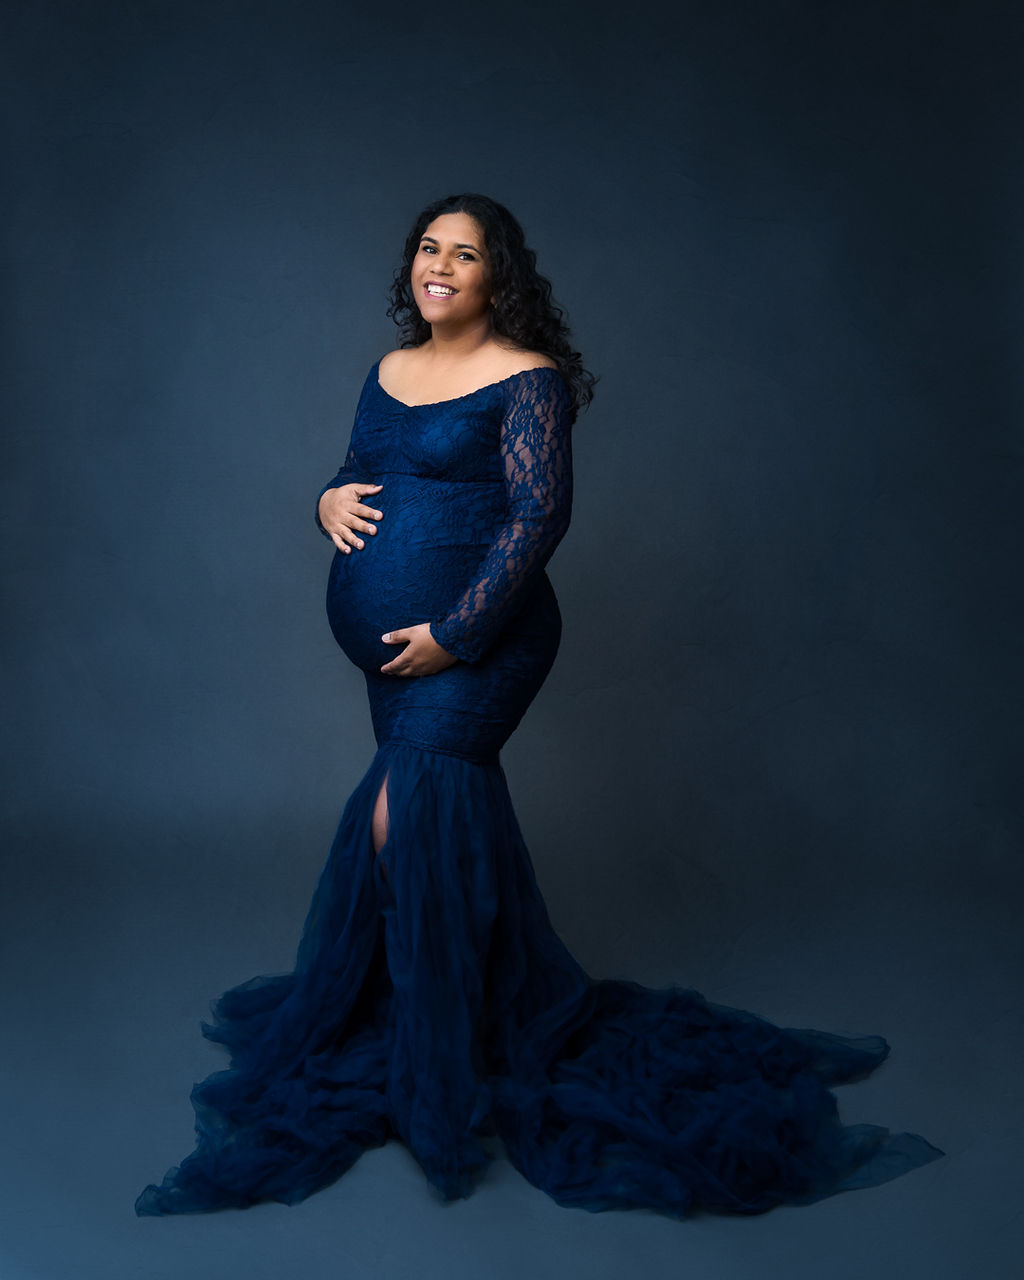 mom to be in dark blue maternity gown cradling her bump